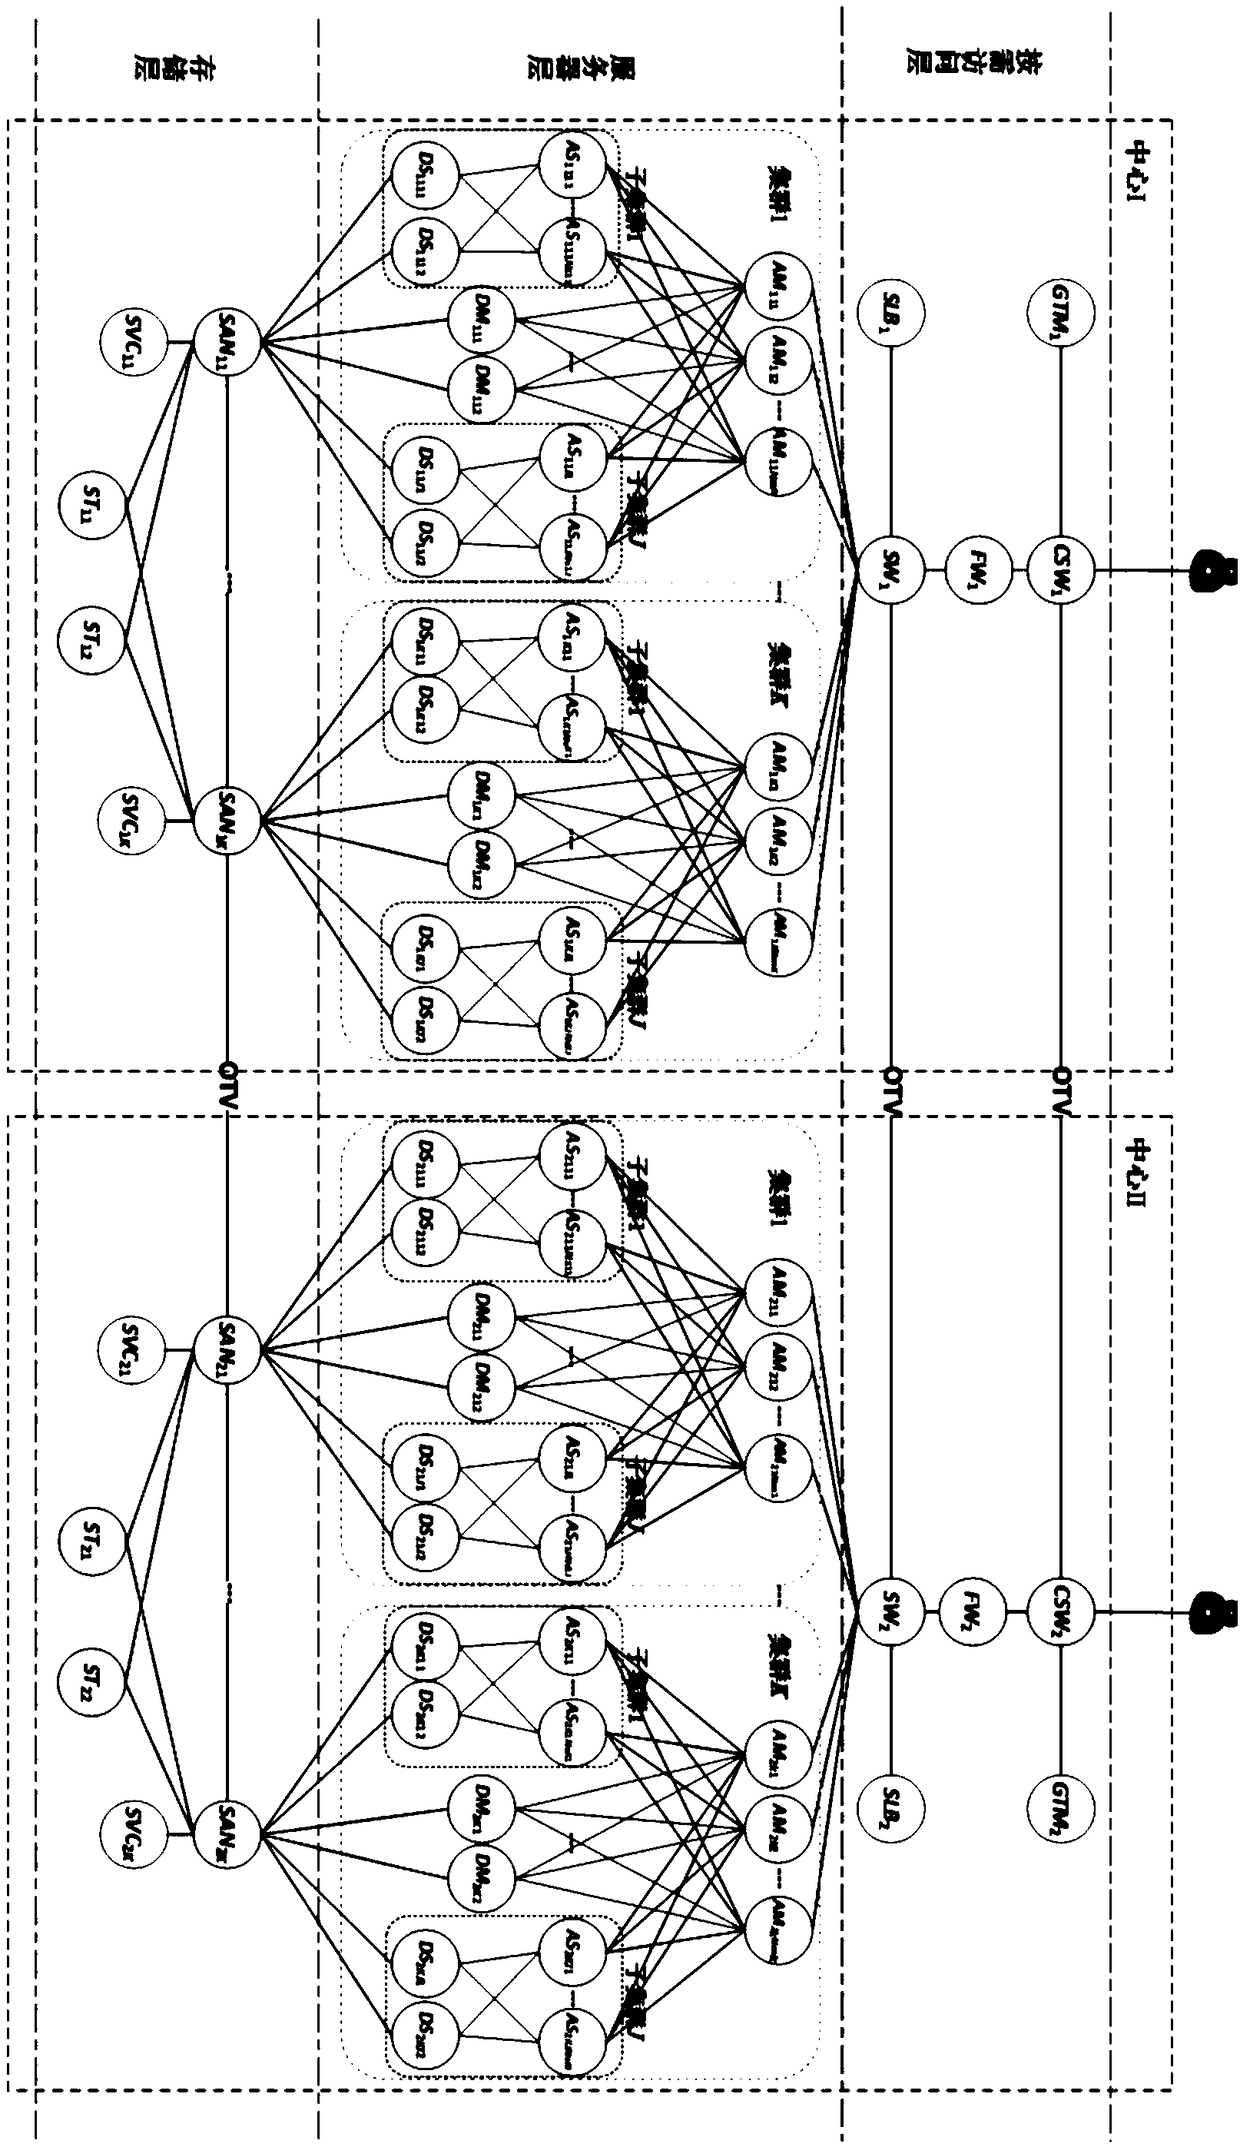 Modeling method for service reliability of IT (Information Technology) architecture based on colored generalized stochastic Petri net